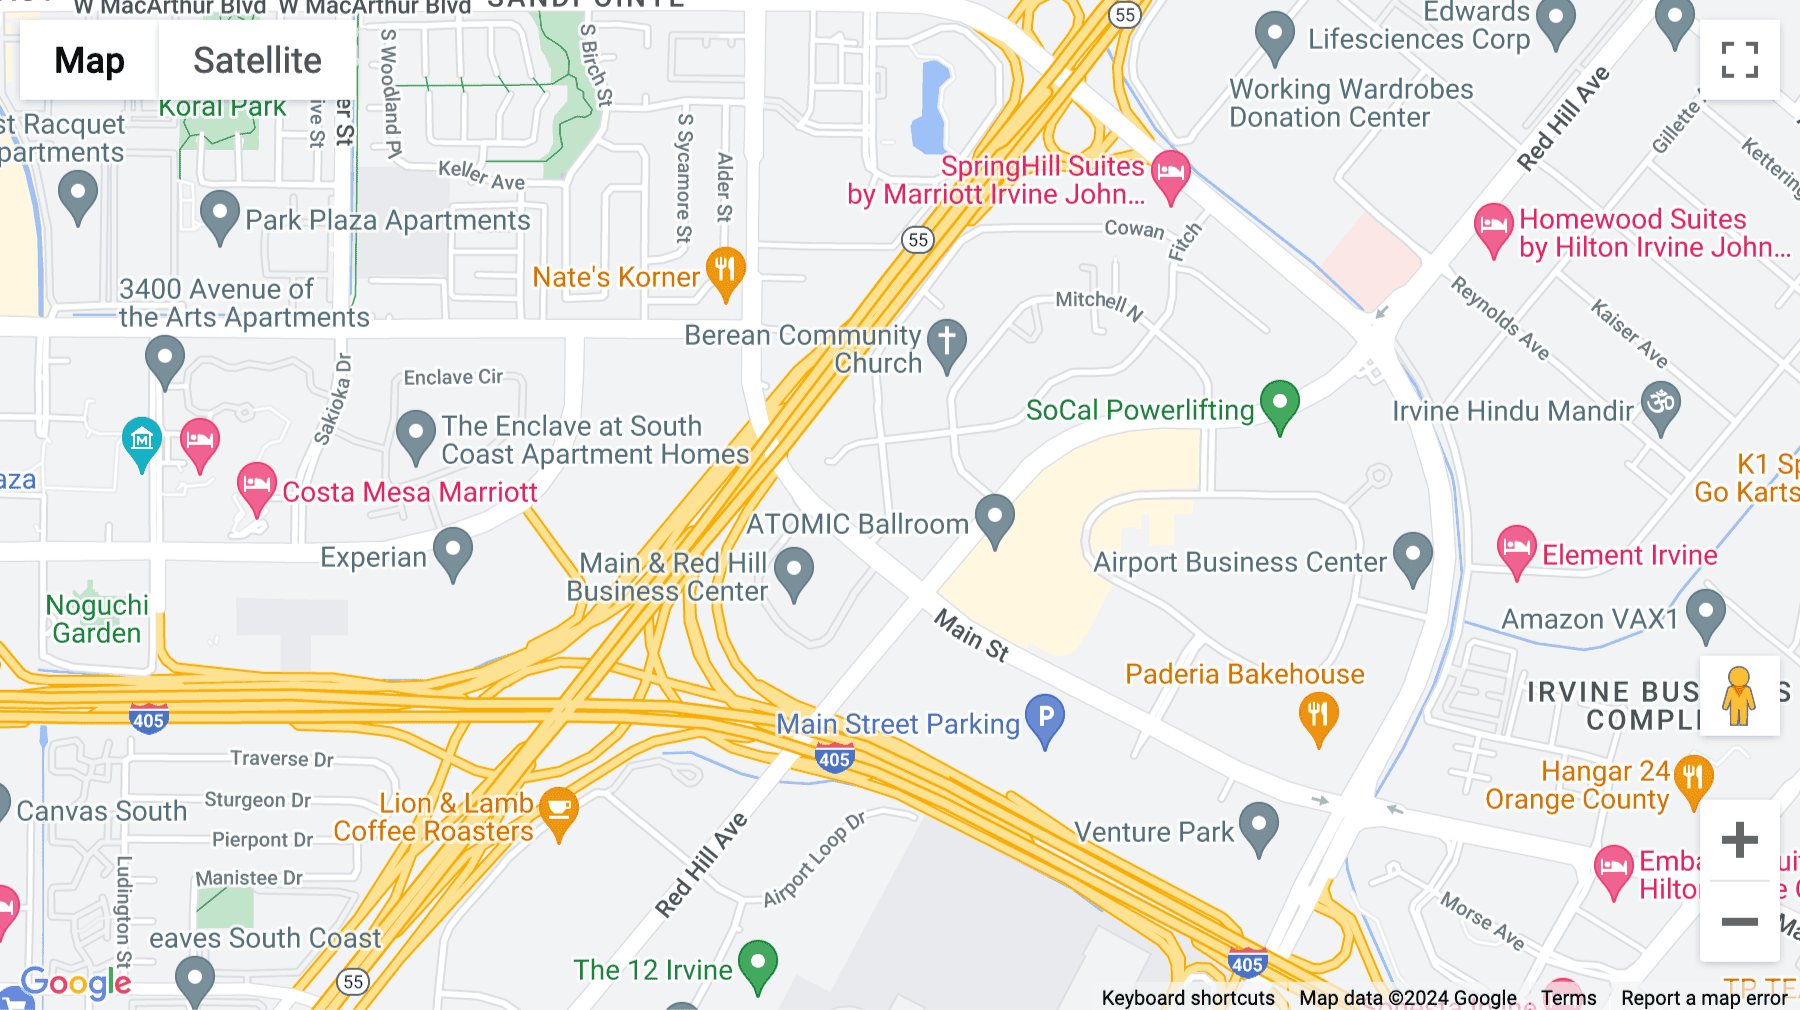 Click for interative map of 18012 Cowan, Suite 200, Irvine